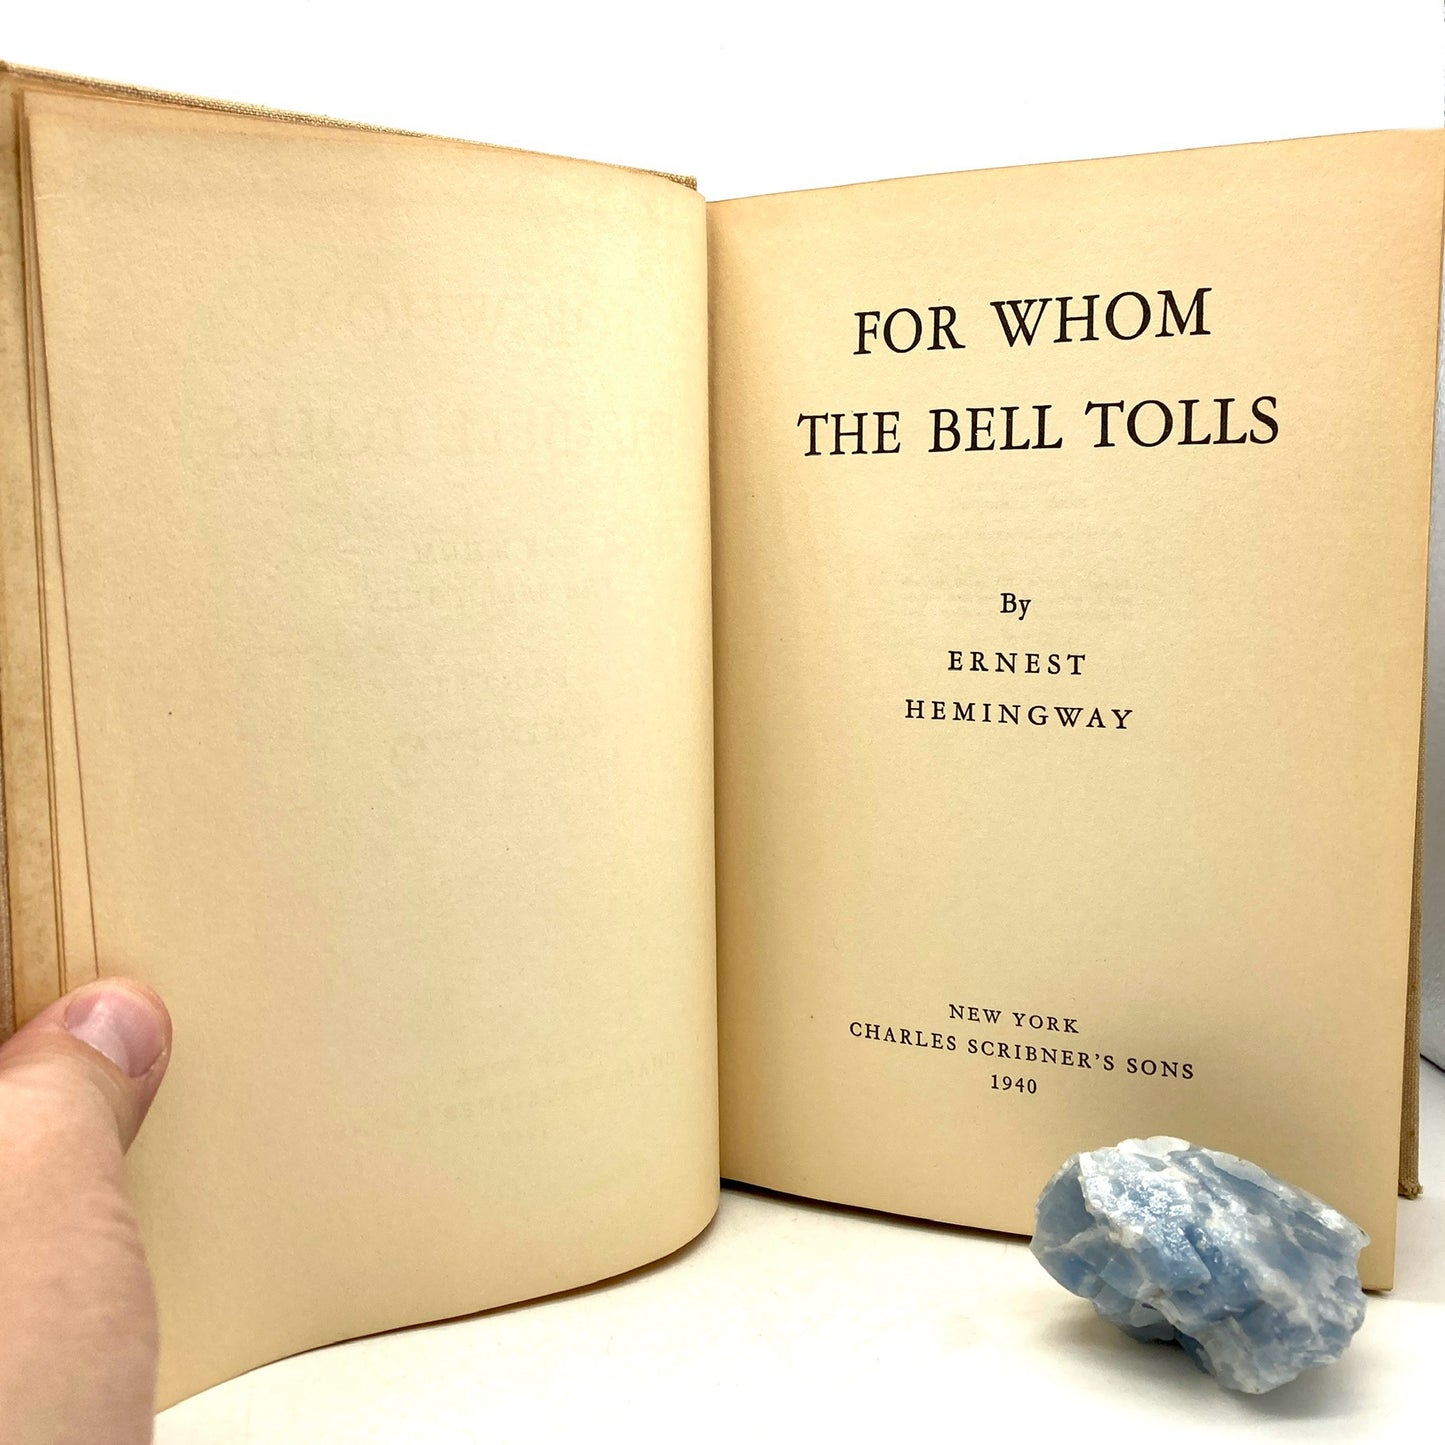 HEMINGWAY, Ernest "For Whom the Bell Tolls" [Scribners, 1940] 1st Edition